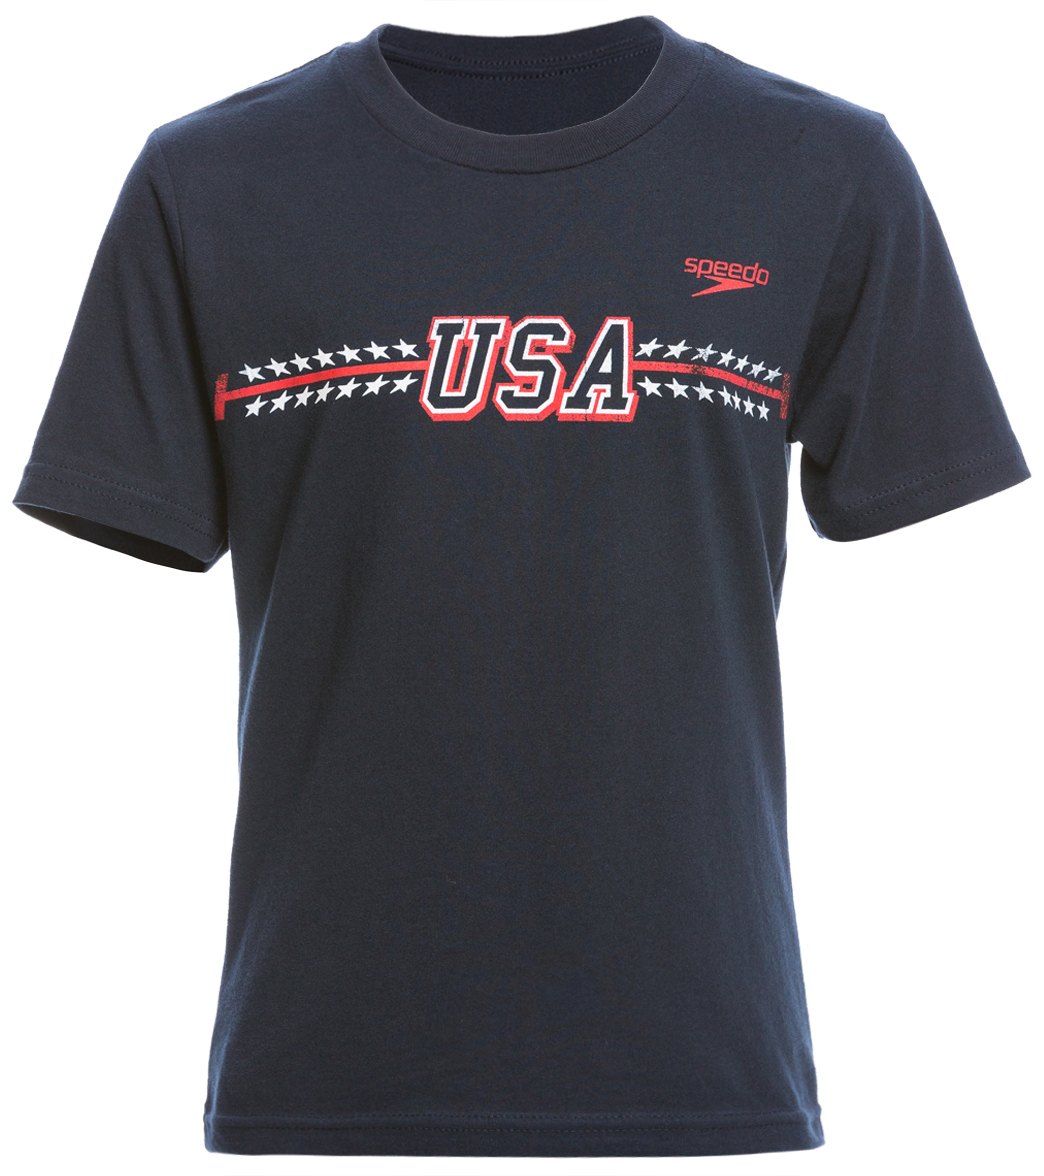 Speedo Youth Men's Franklin Jersey Tee Shirt - Navy Small Cotton/Polyester - Swimoutlet.com